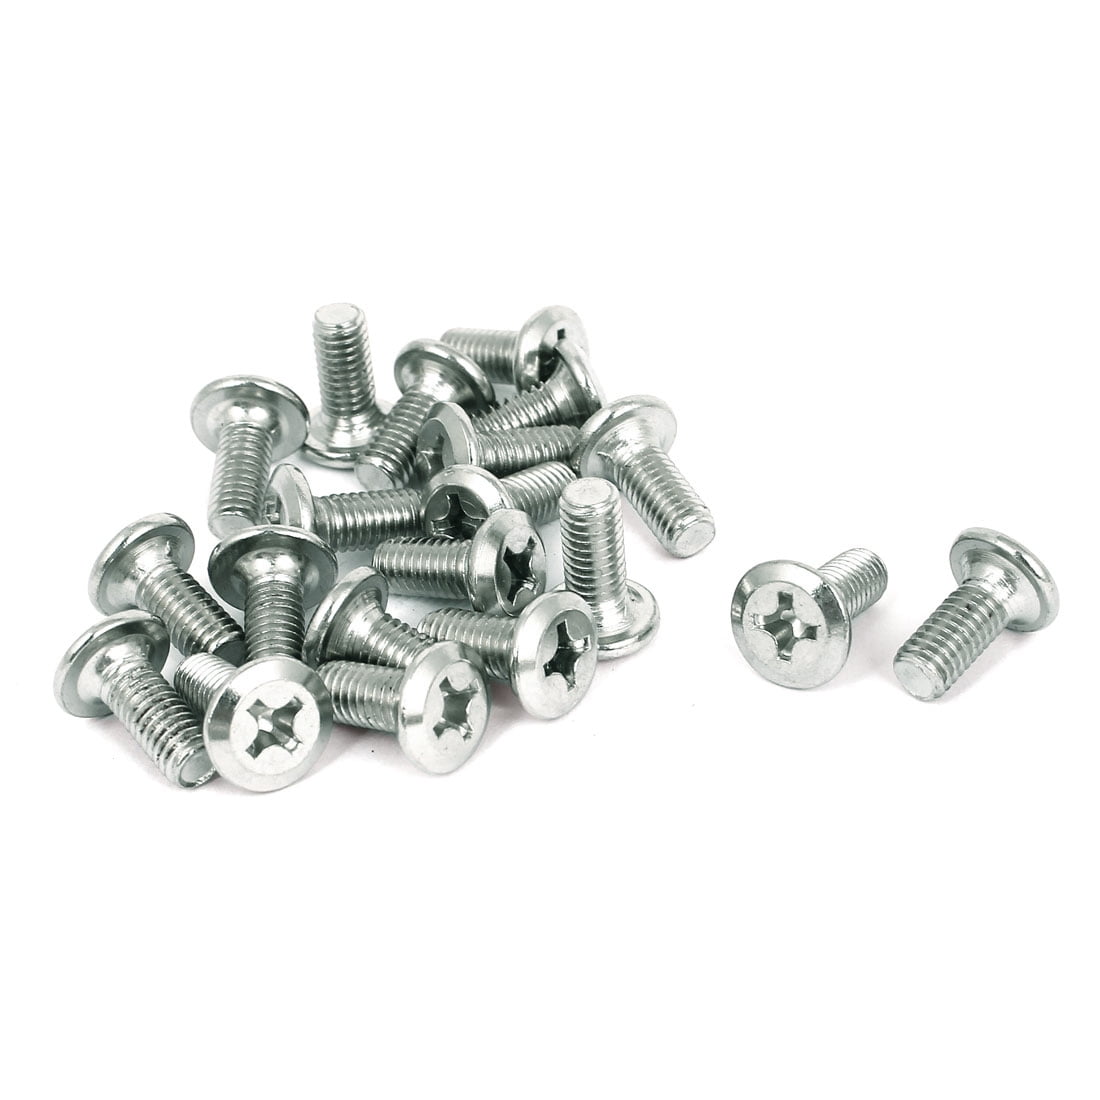 pack of 20 Machine screws with nuts M6 x 25 countersunk slot bolt bolts screw 